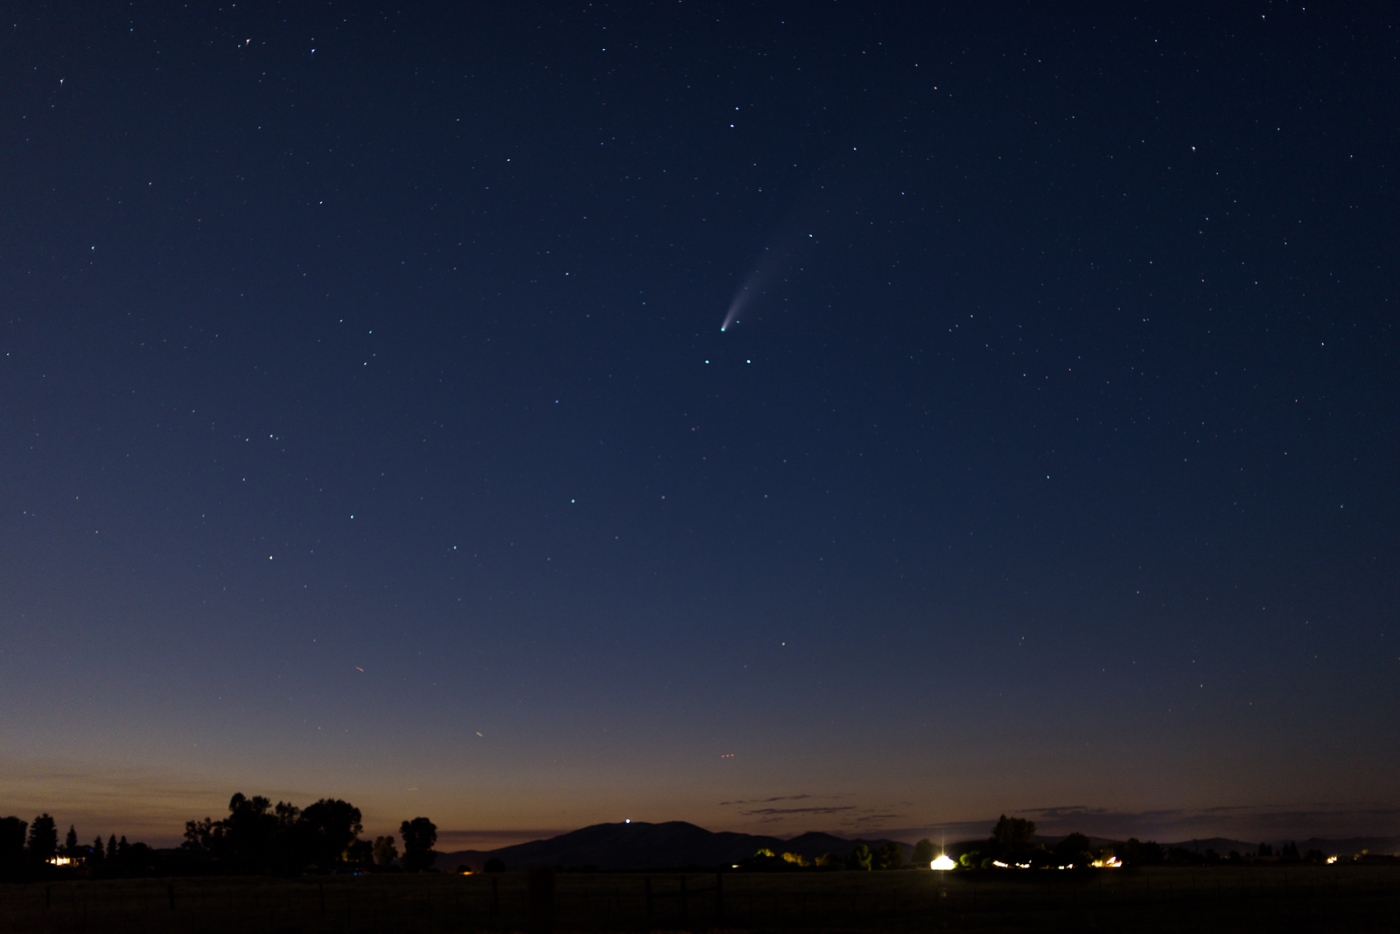 Comet NEOWISE in the sky above Clovis, California.